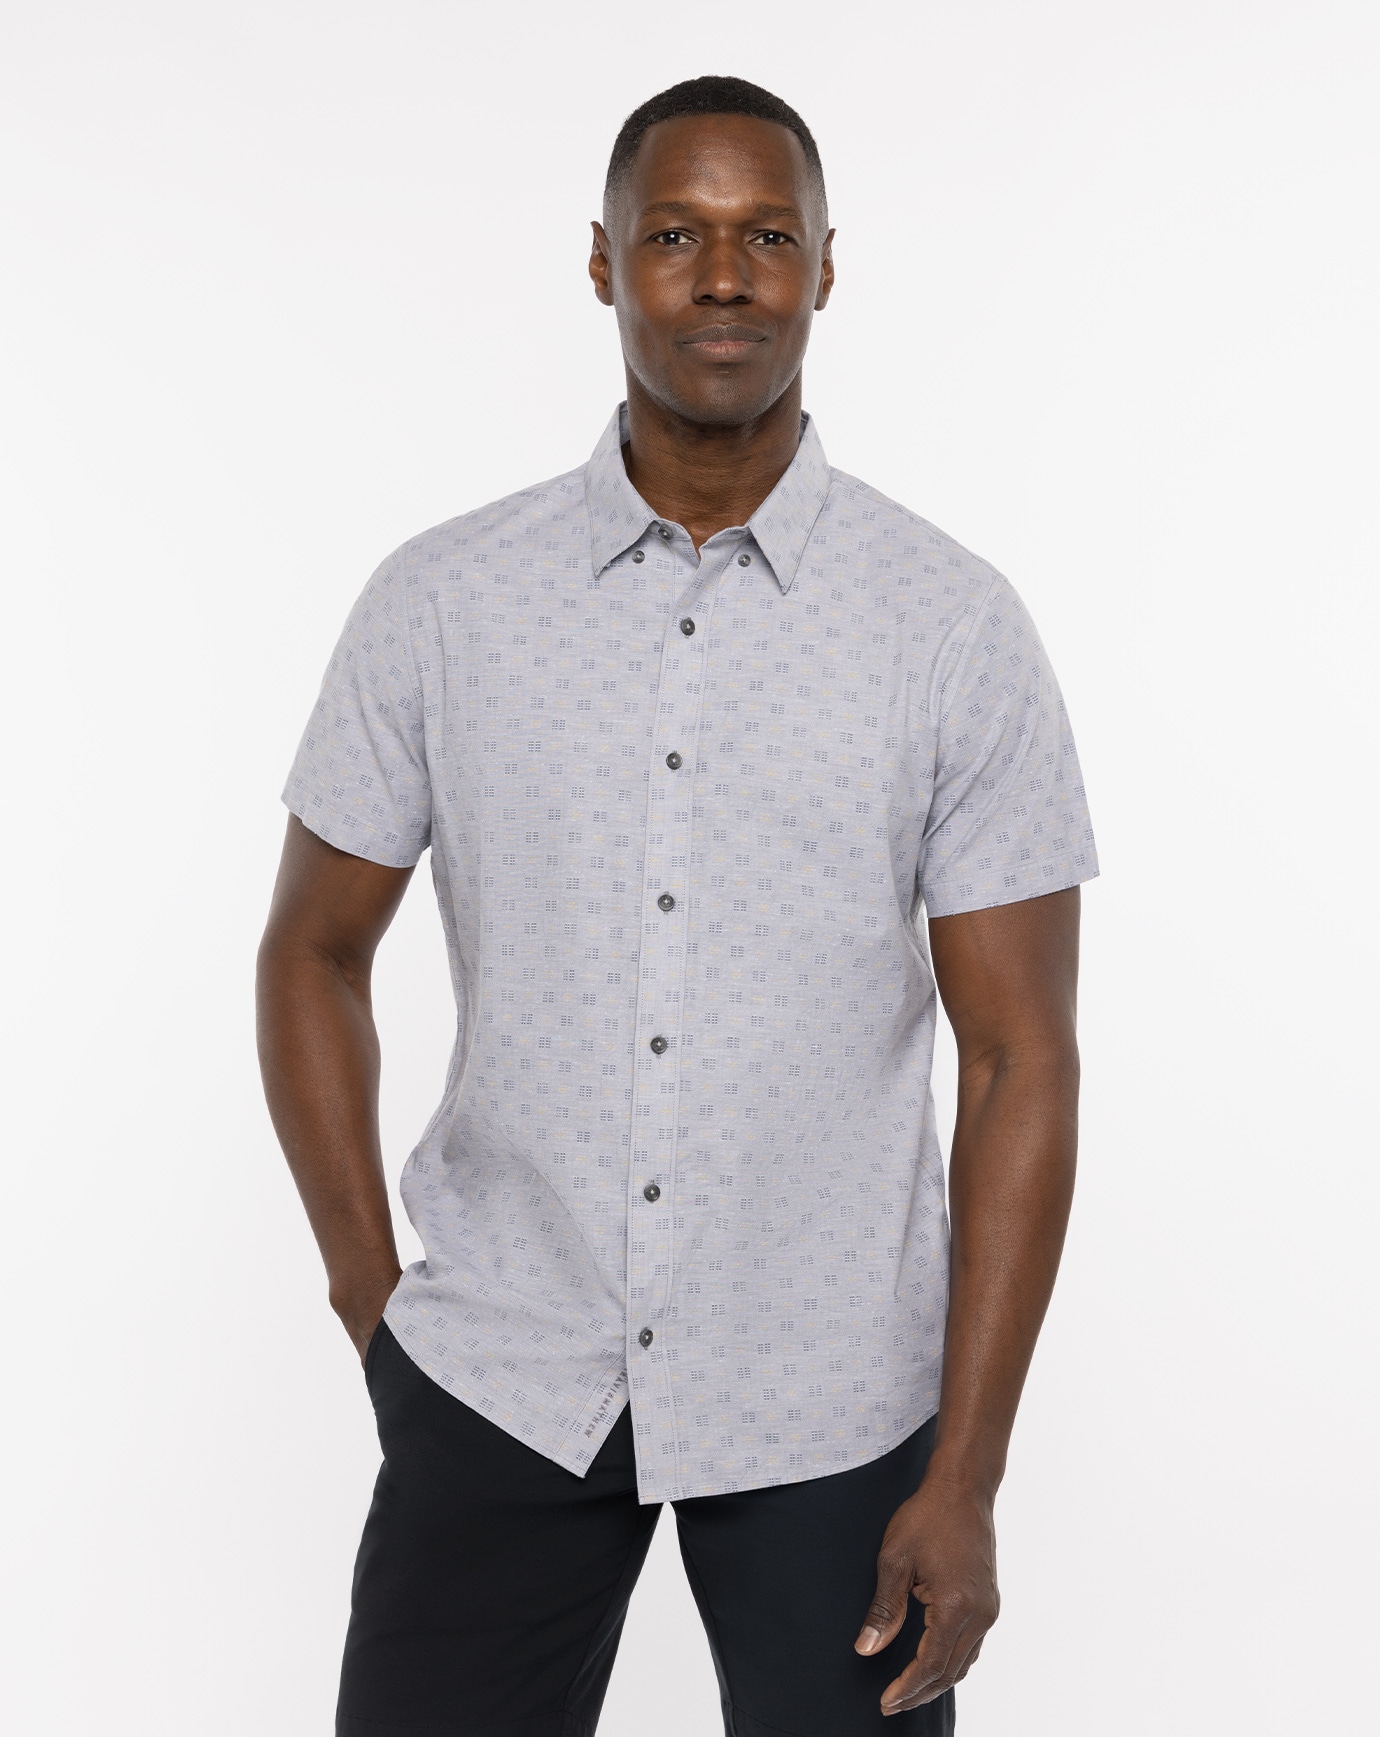 Related Product - SWEET AND TANGY BUTTON-UP